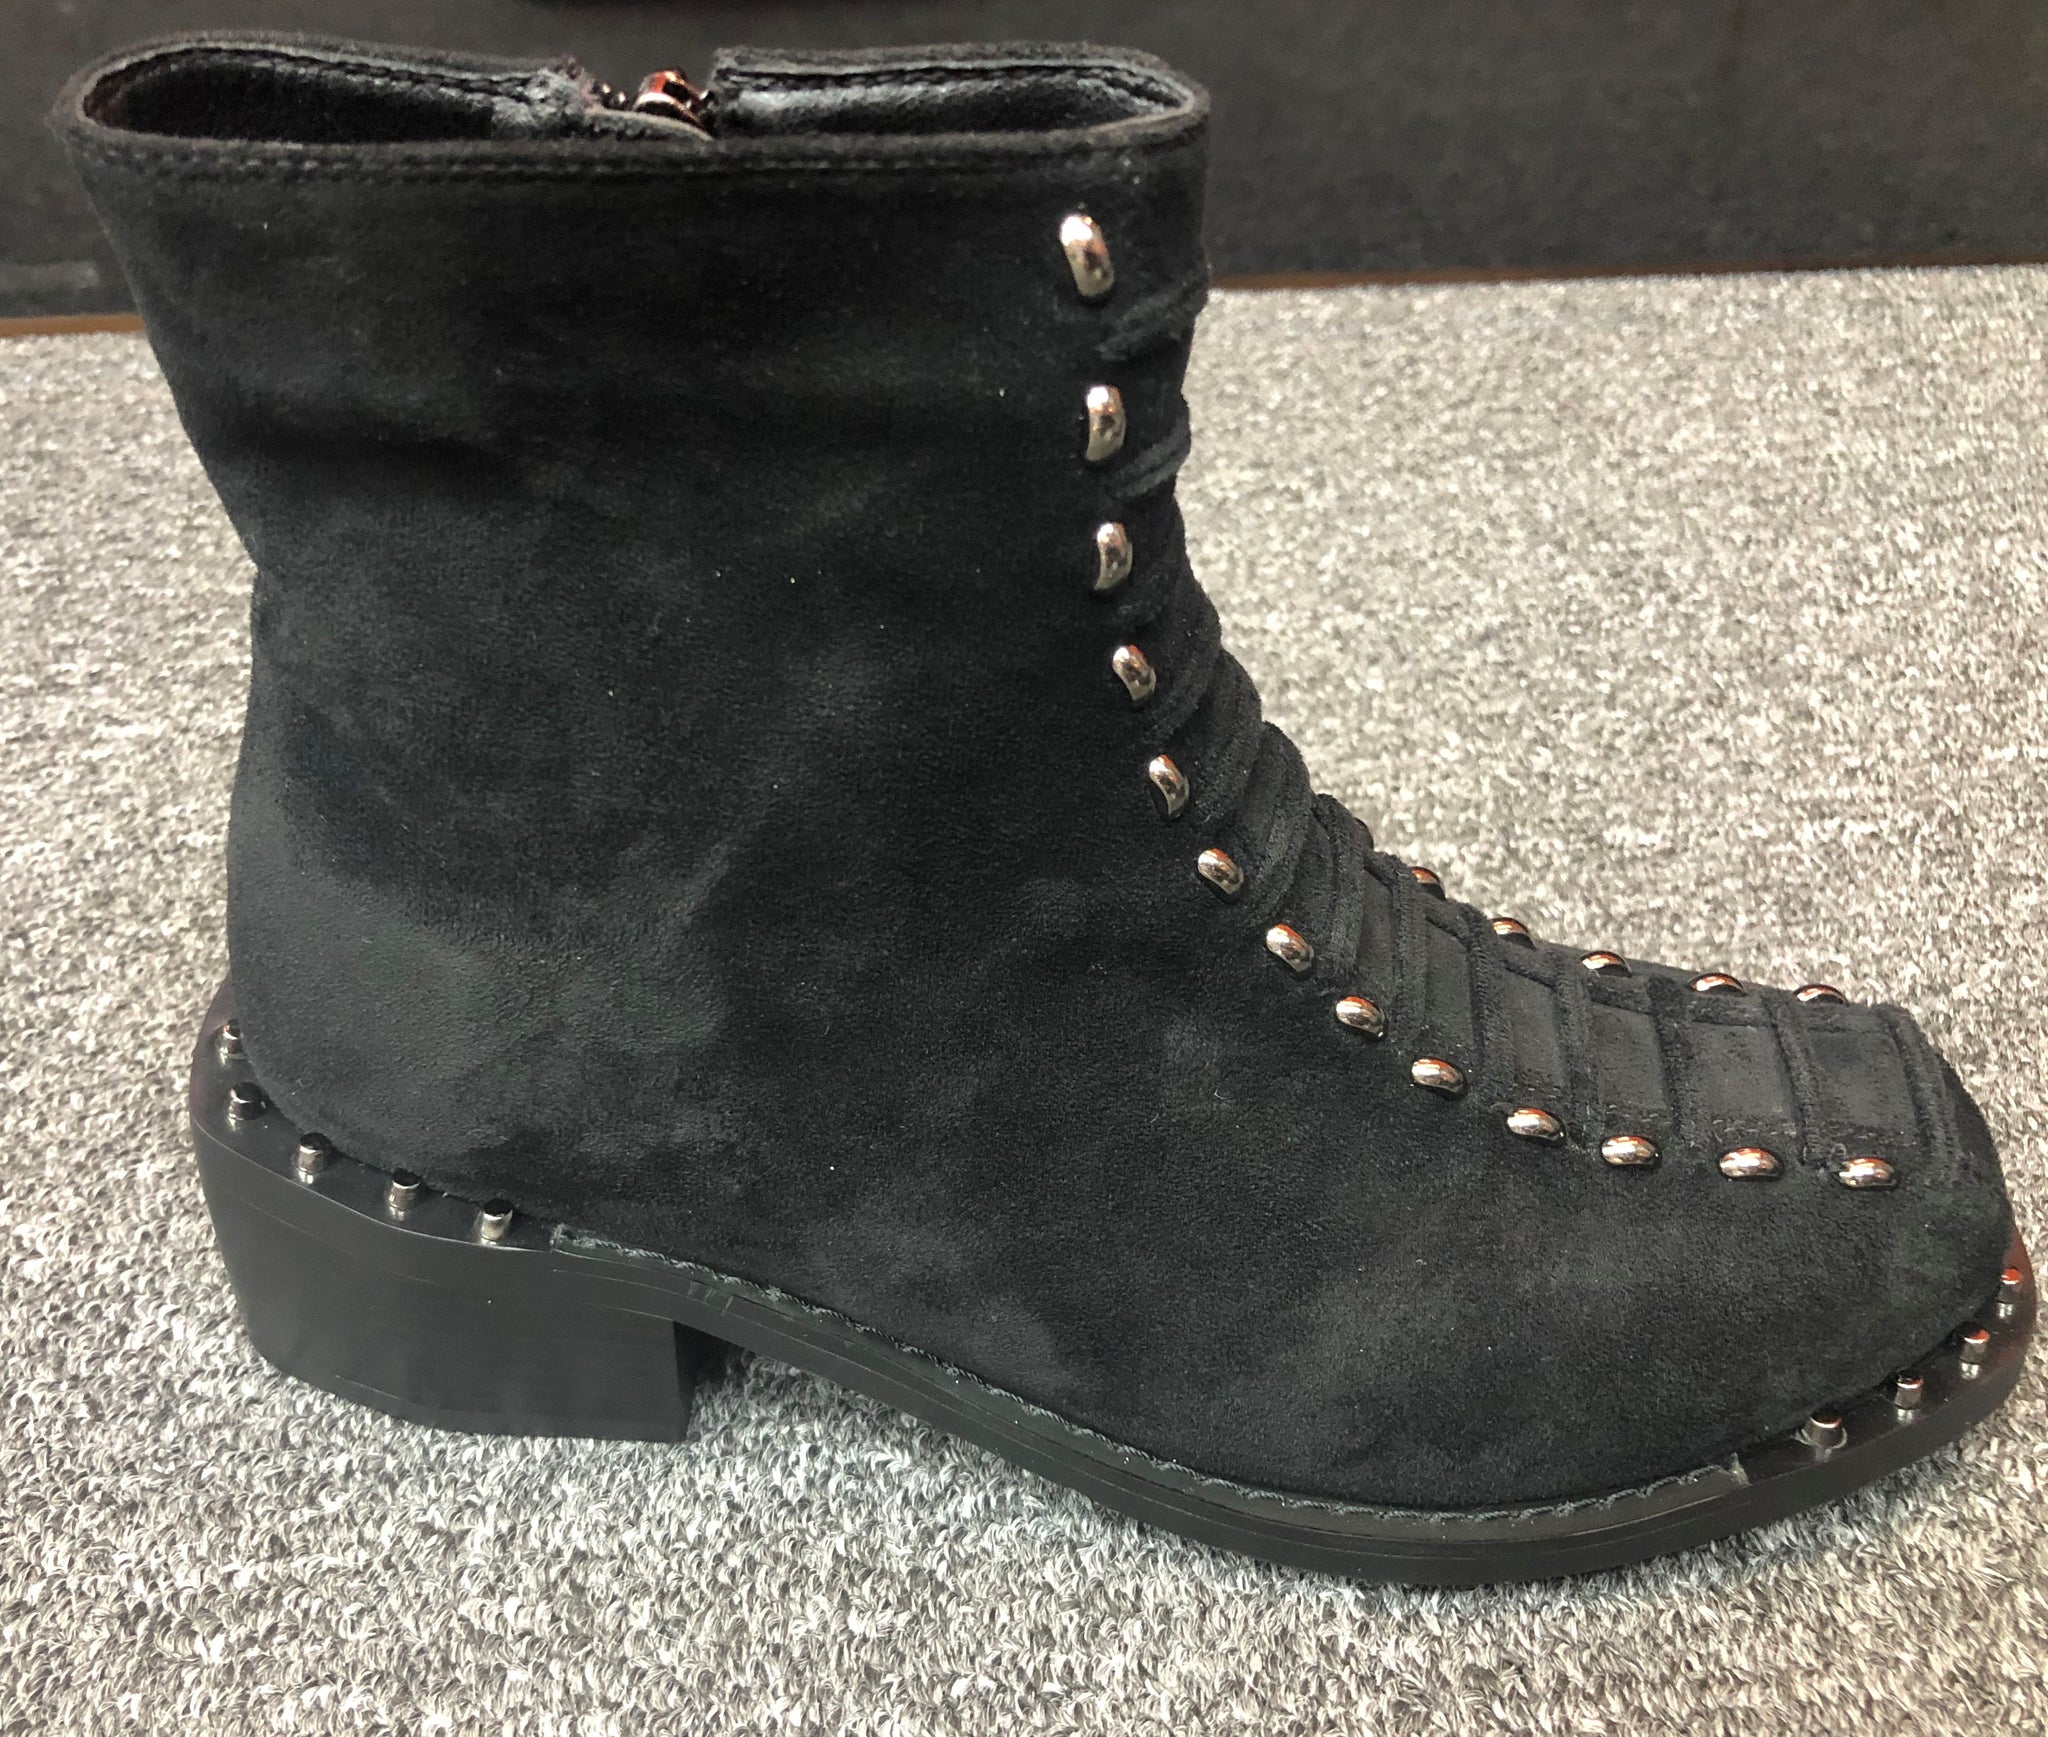 Black Lace-up Suede Rugged Boots